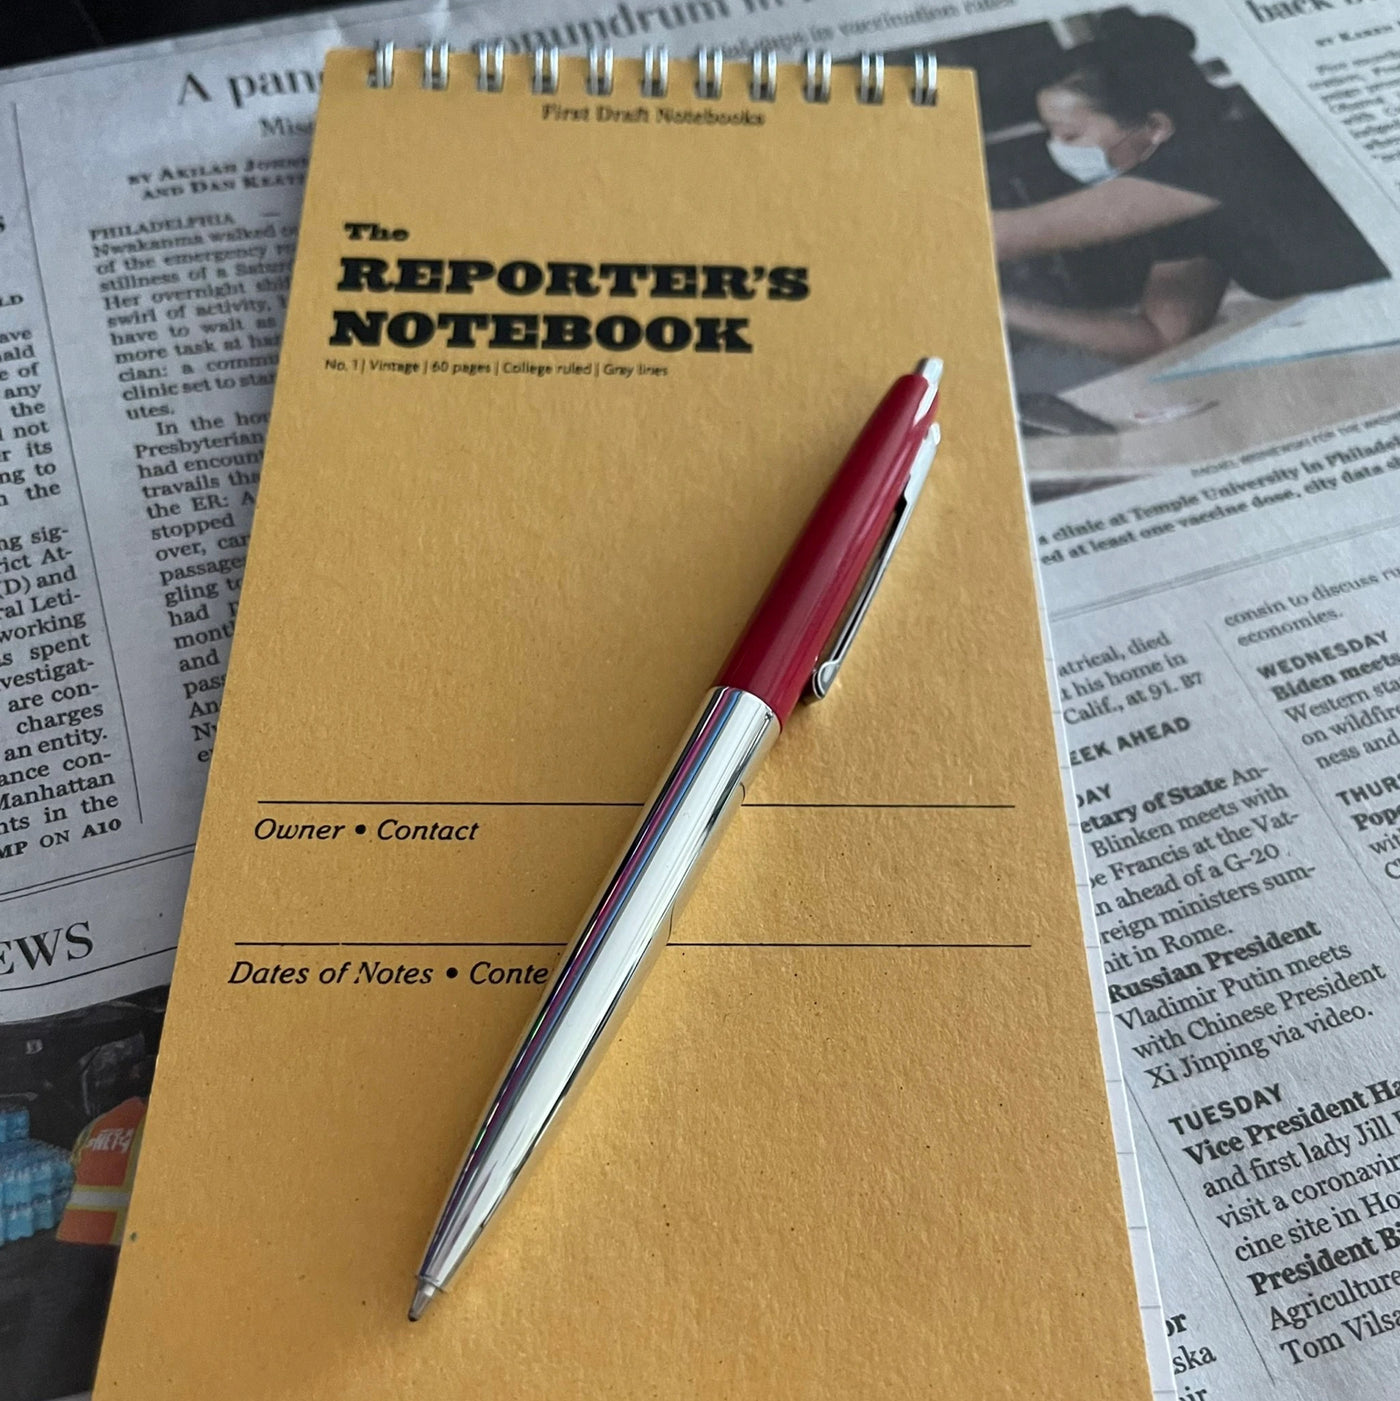 The Reporter’s Notebook